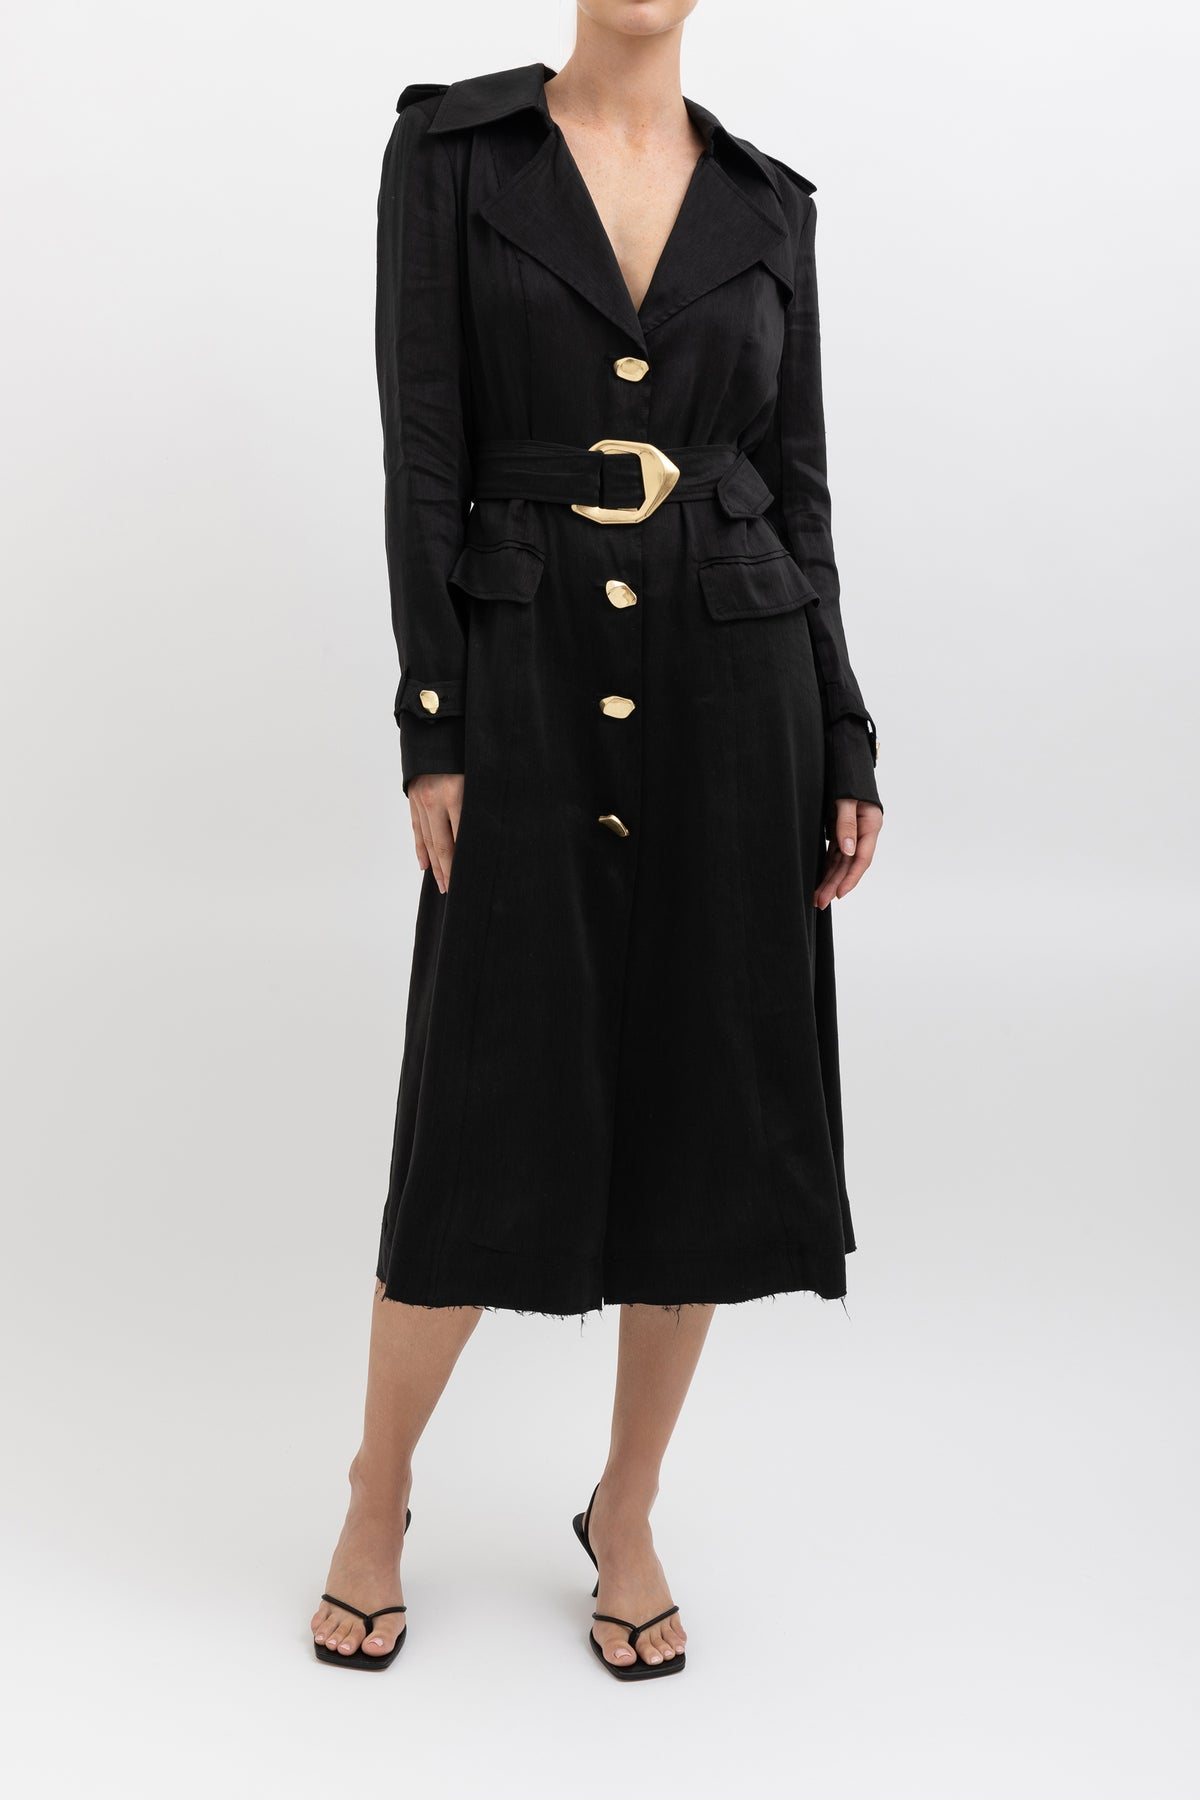 Lenore Trench Dress